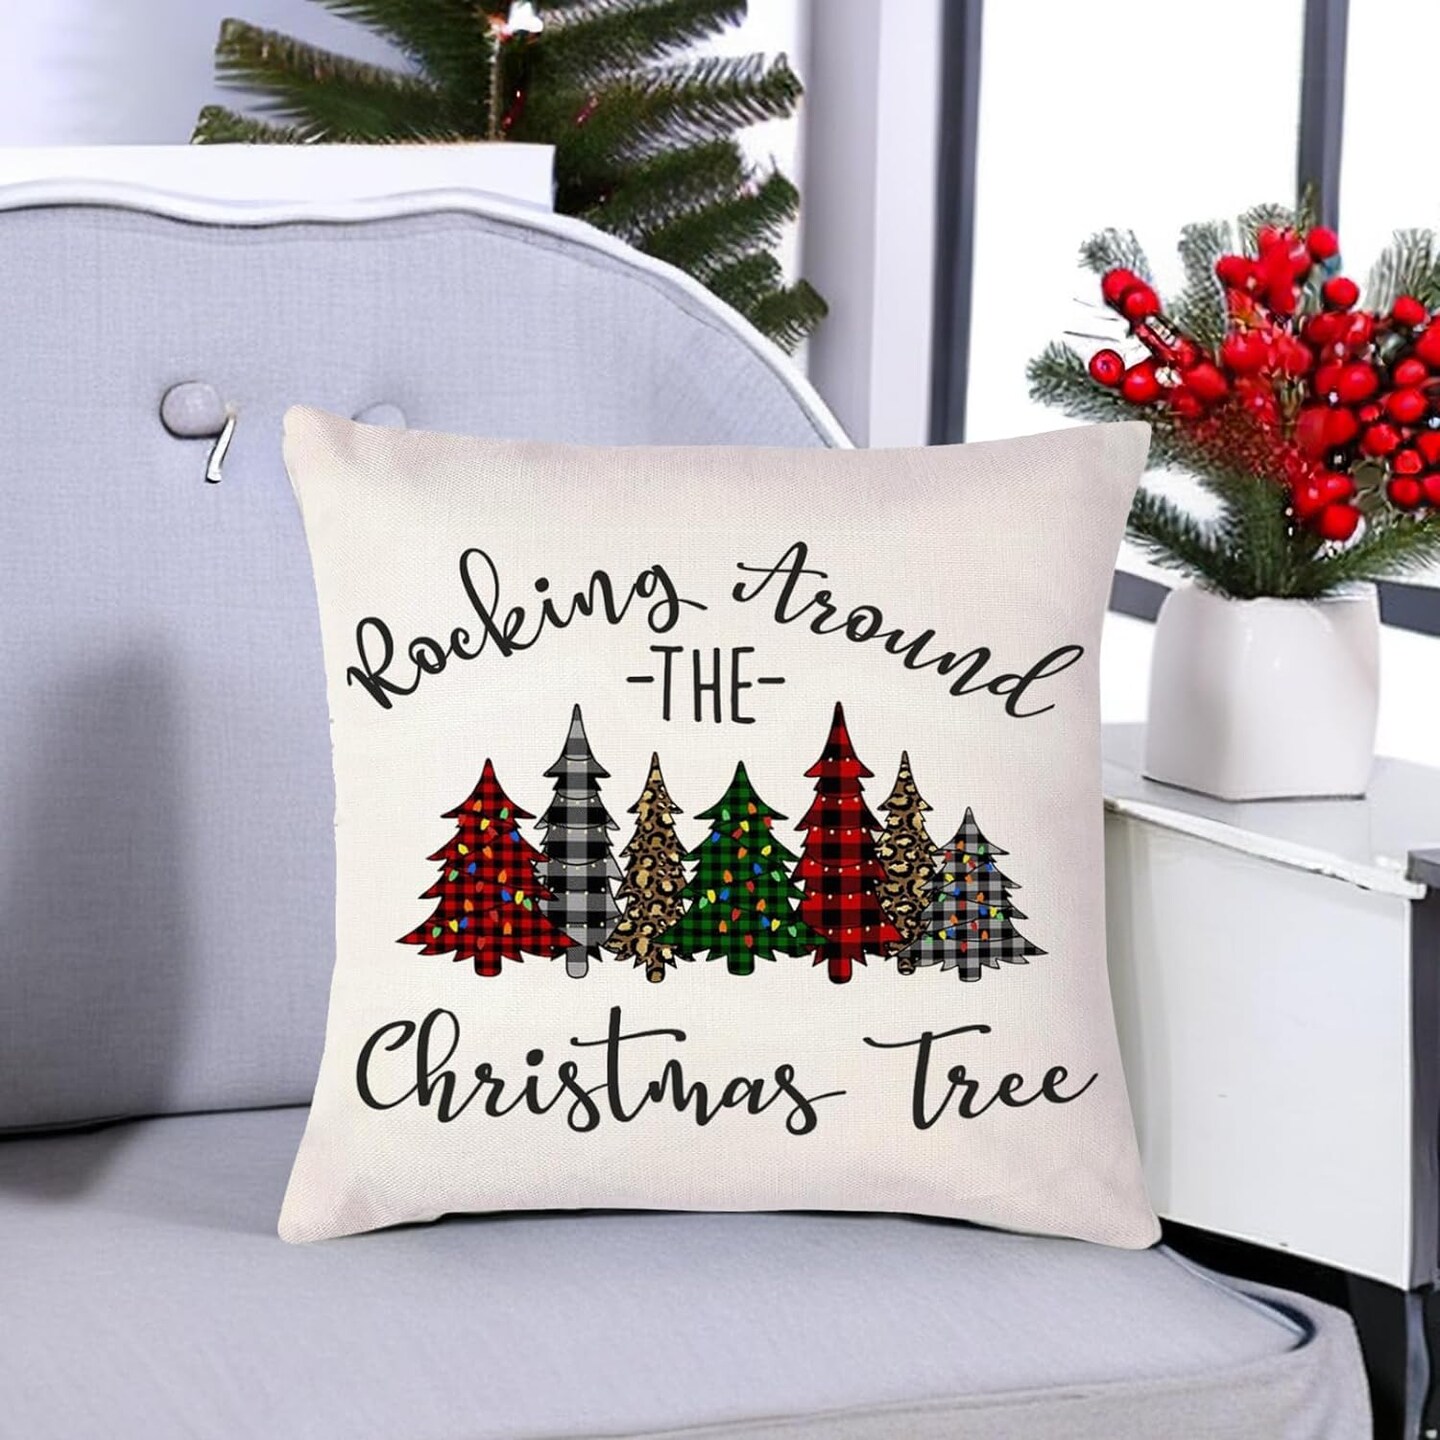 18 Inches Decorative Christmas Pillow Covers Set of 2